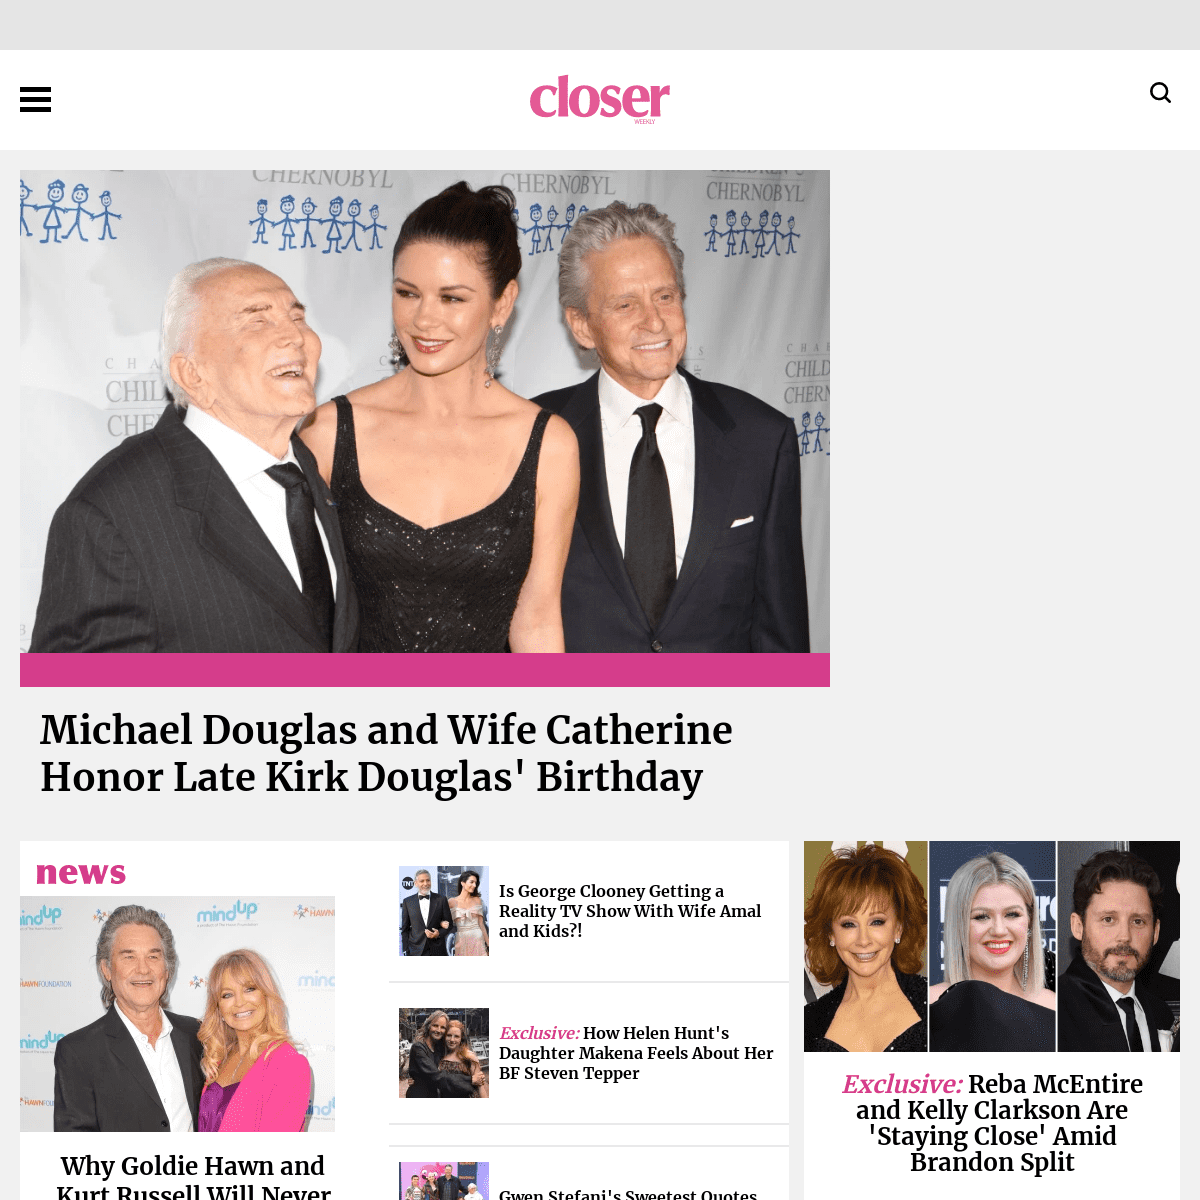 A complete backup of closerweekly.com